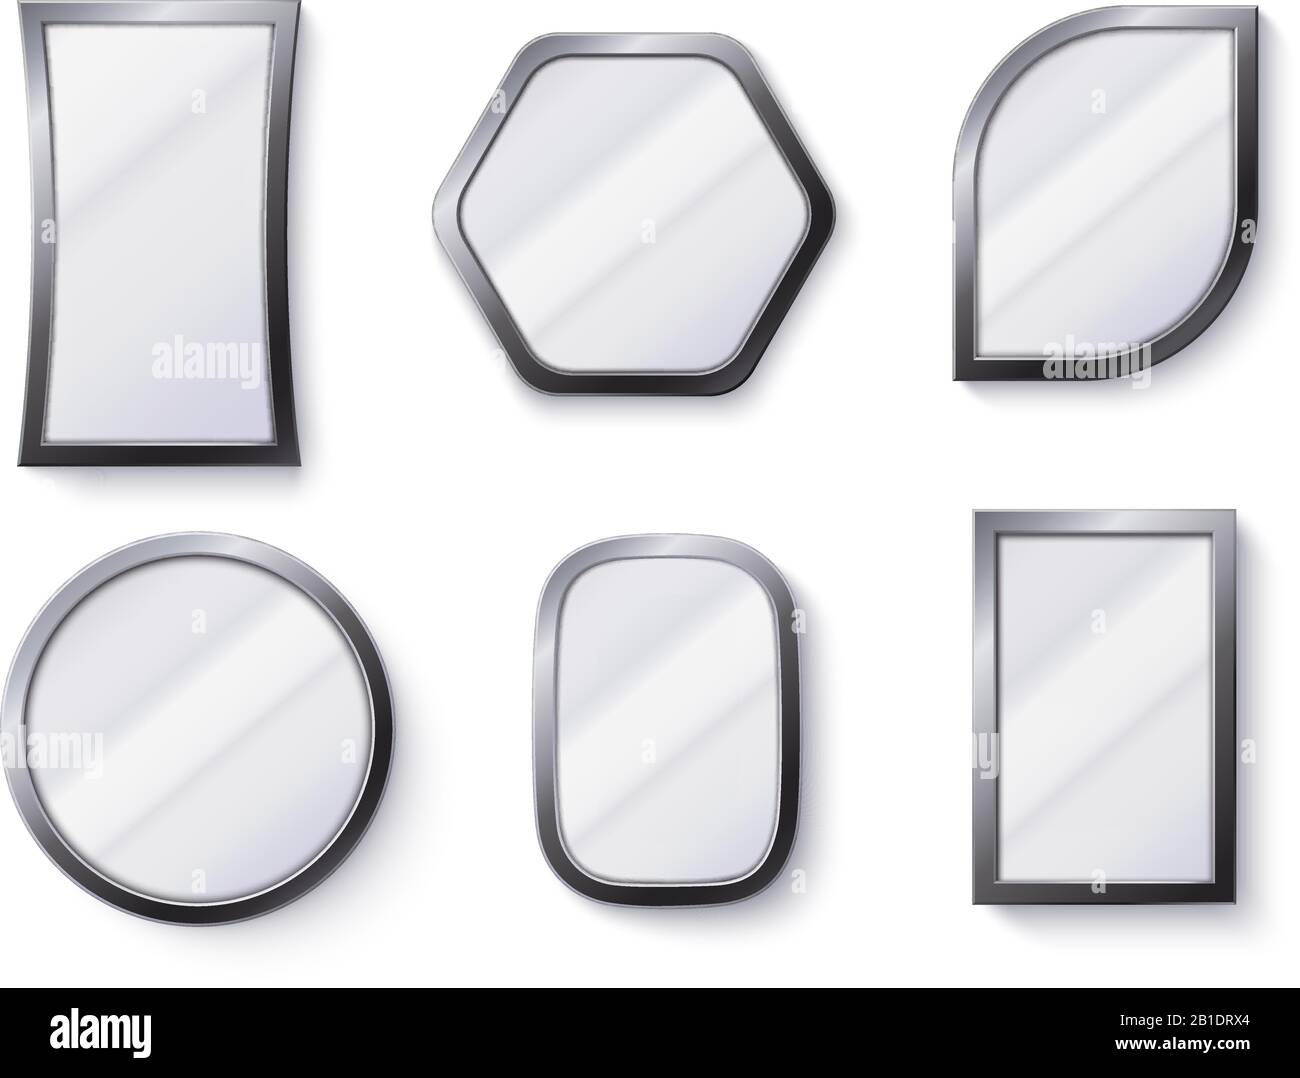 Realistic mirrors. Reflective mirror surface in frame, mirroring glass and round mirror 3D isolated vector illustration Stock Vector